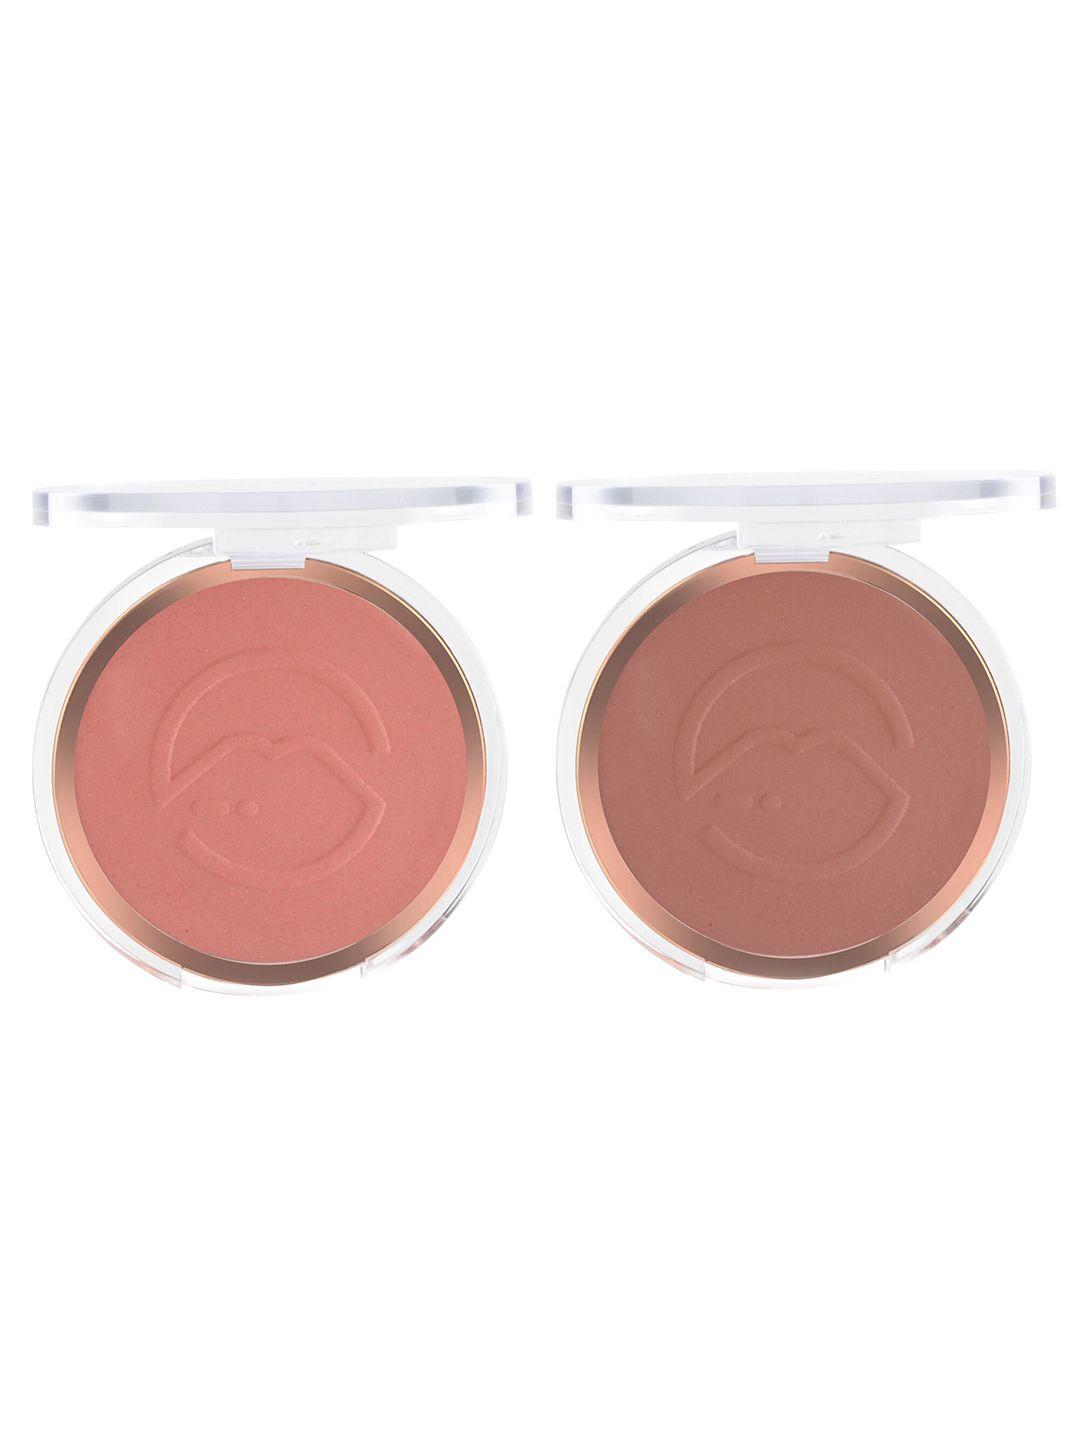 mars set of 2 flush of love highly pigmented matte face blusher - shade 02 & 01